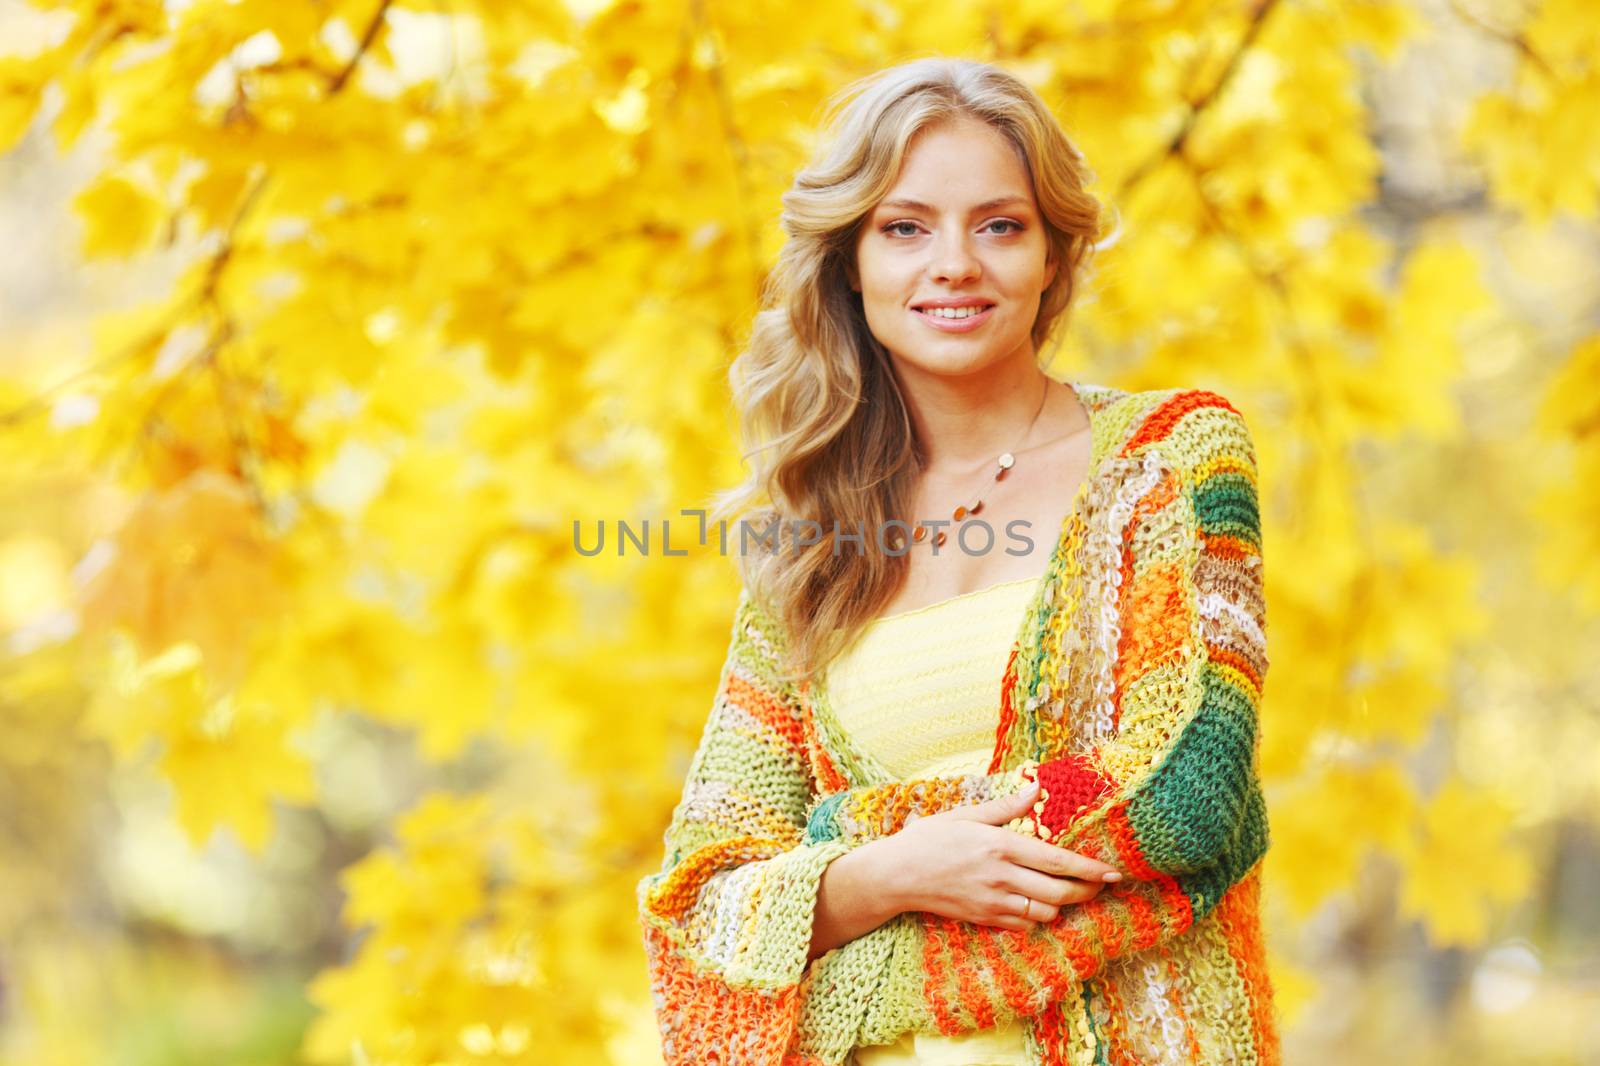 Young beautiful woman posing in autumn park